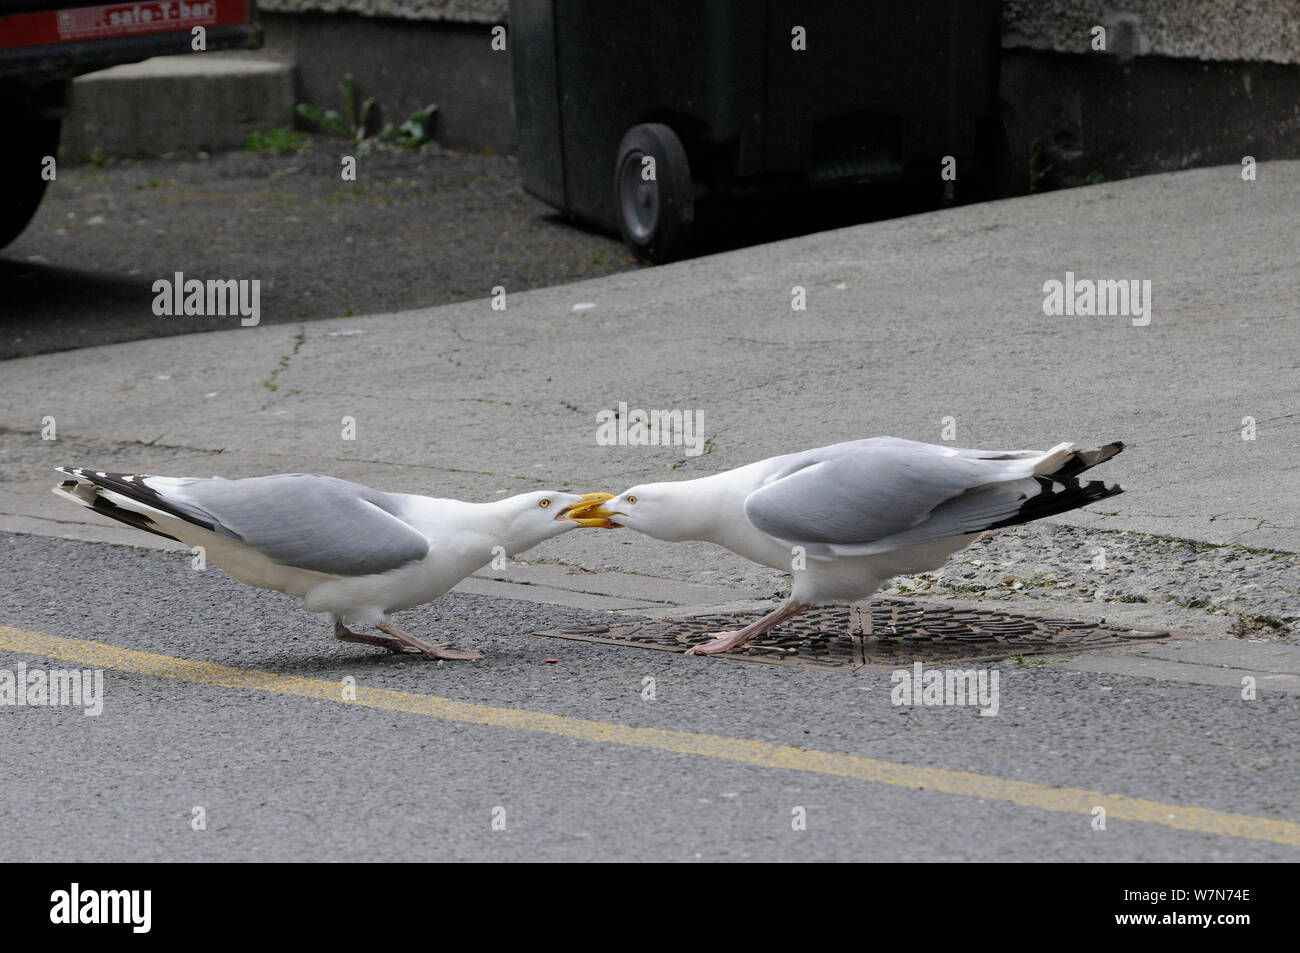 Two adult Herring gulls (Larus argentatus) fighting on a pavement as one clasps another by the beak and tugs, Looe, Cornwall, UK, June. Stock Photo